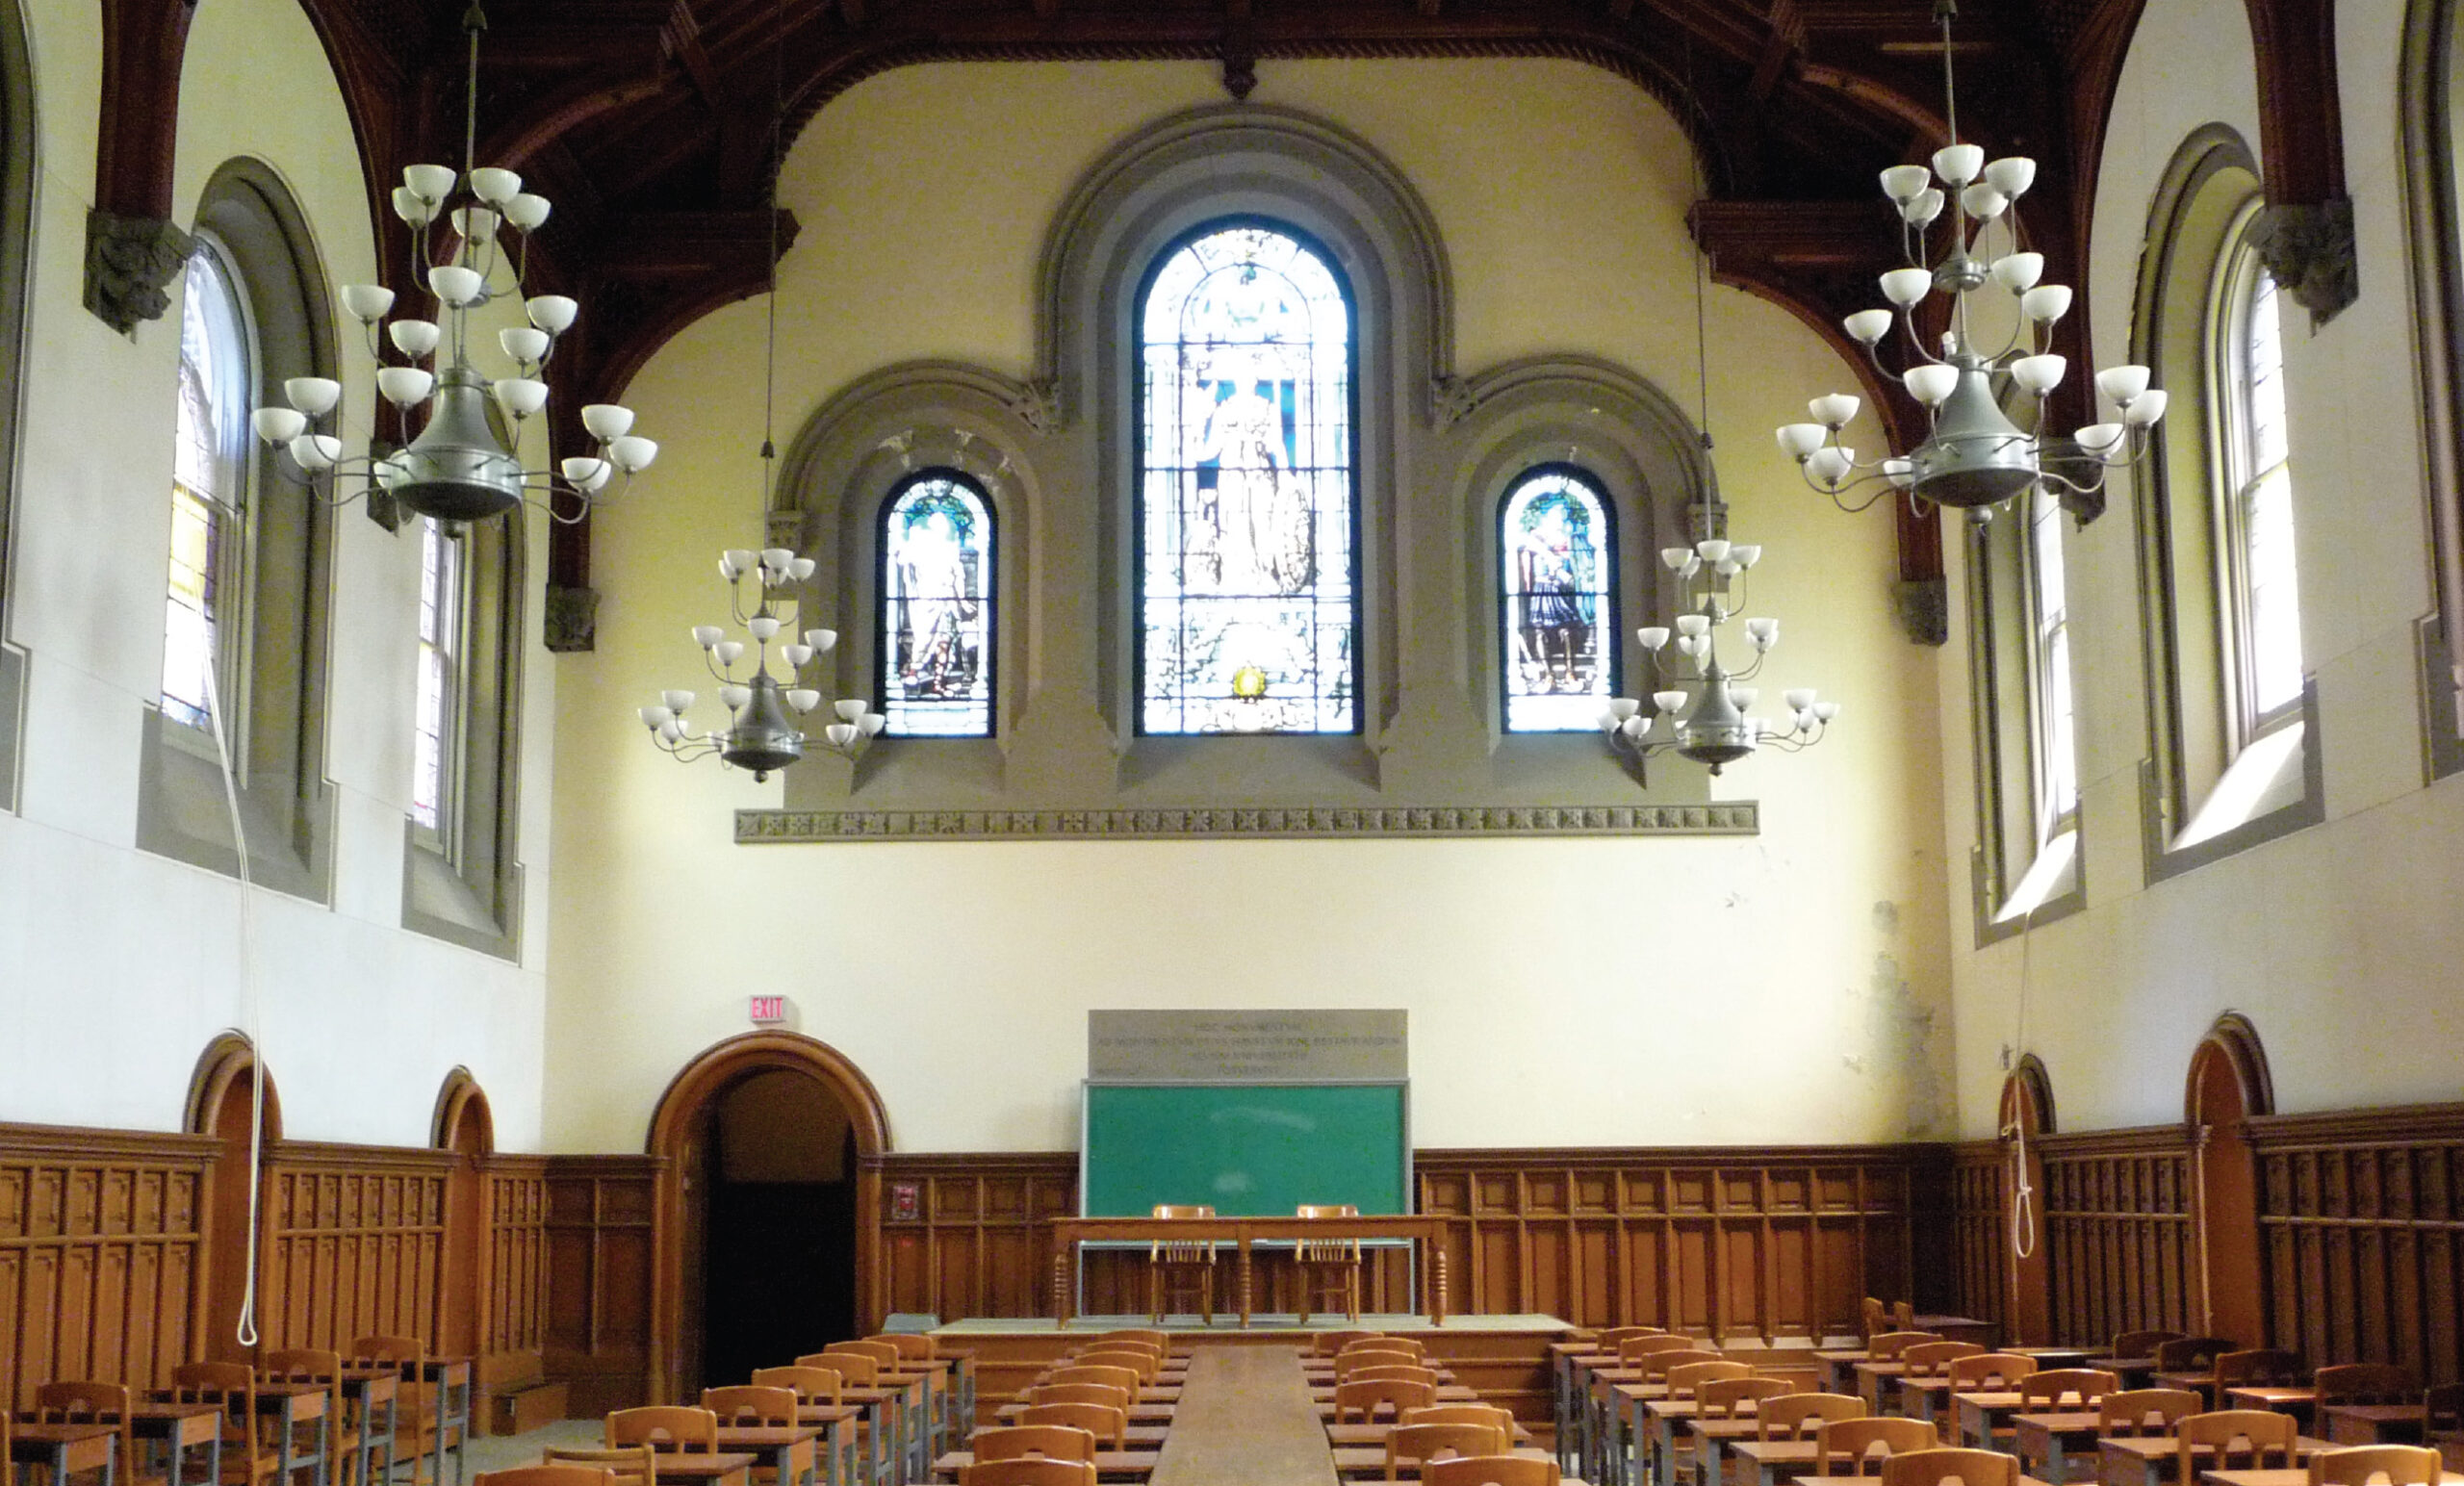 Lecture hall with stainded glass window